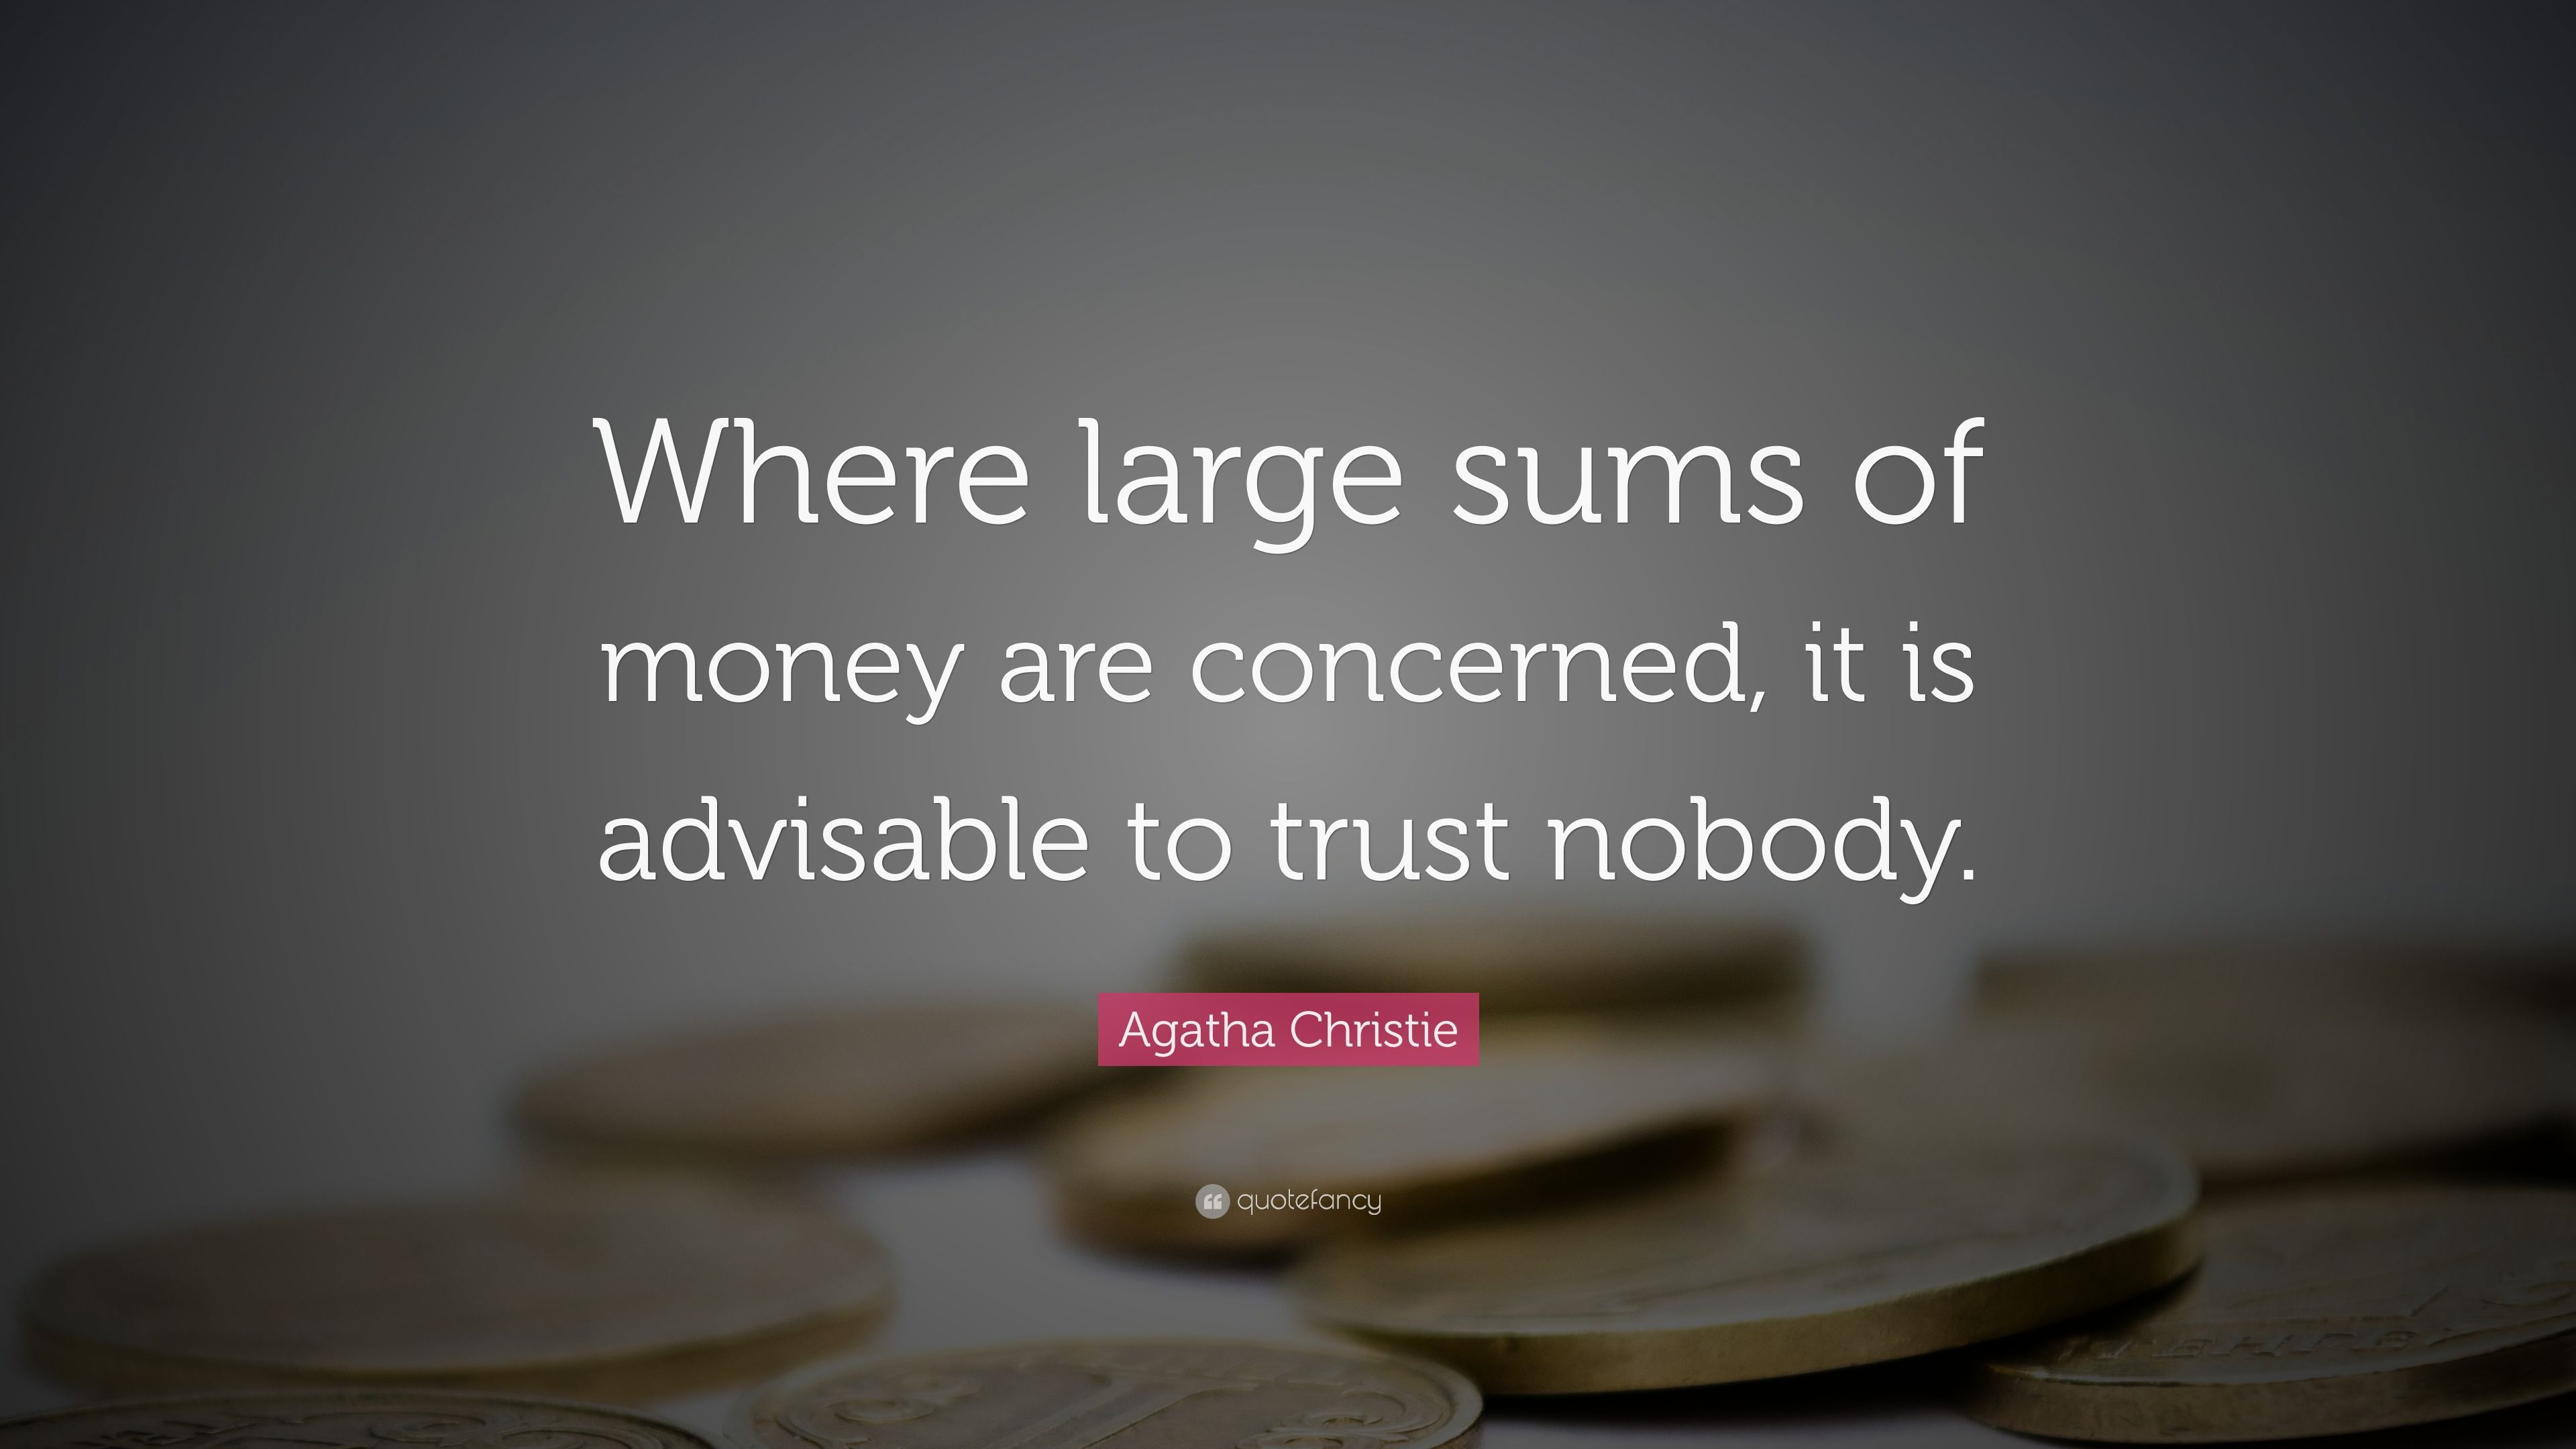 Agatha Christie Quote: “Where large sums of money are concerned, it is advisable to trust nobody.”